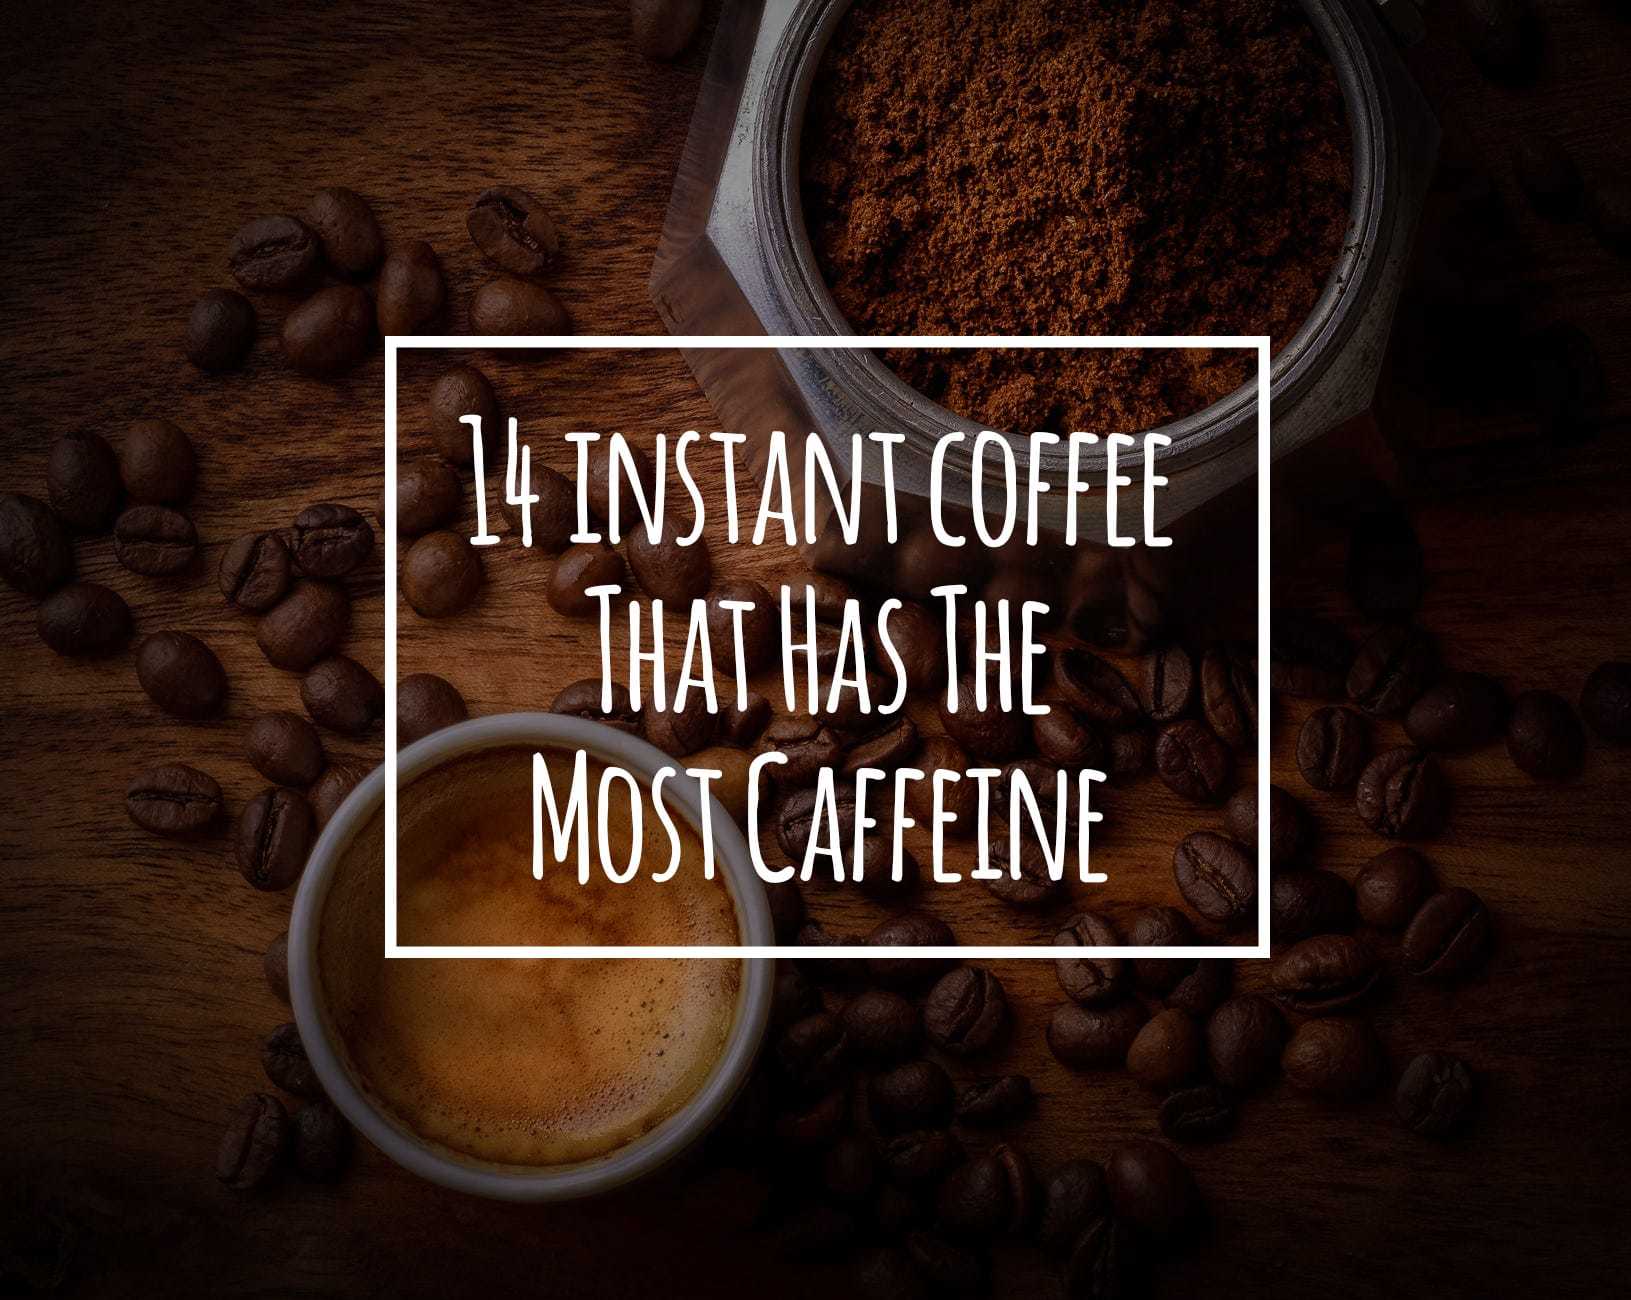 Which Instant Coffee Has The Most Caffeine